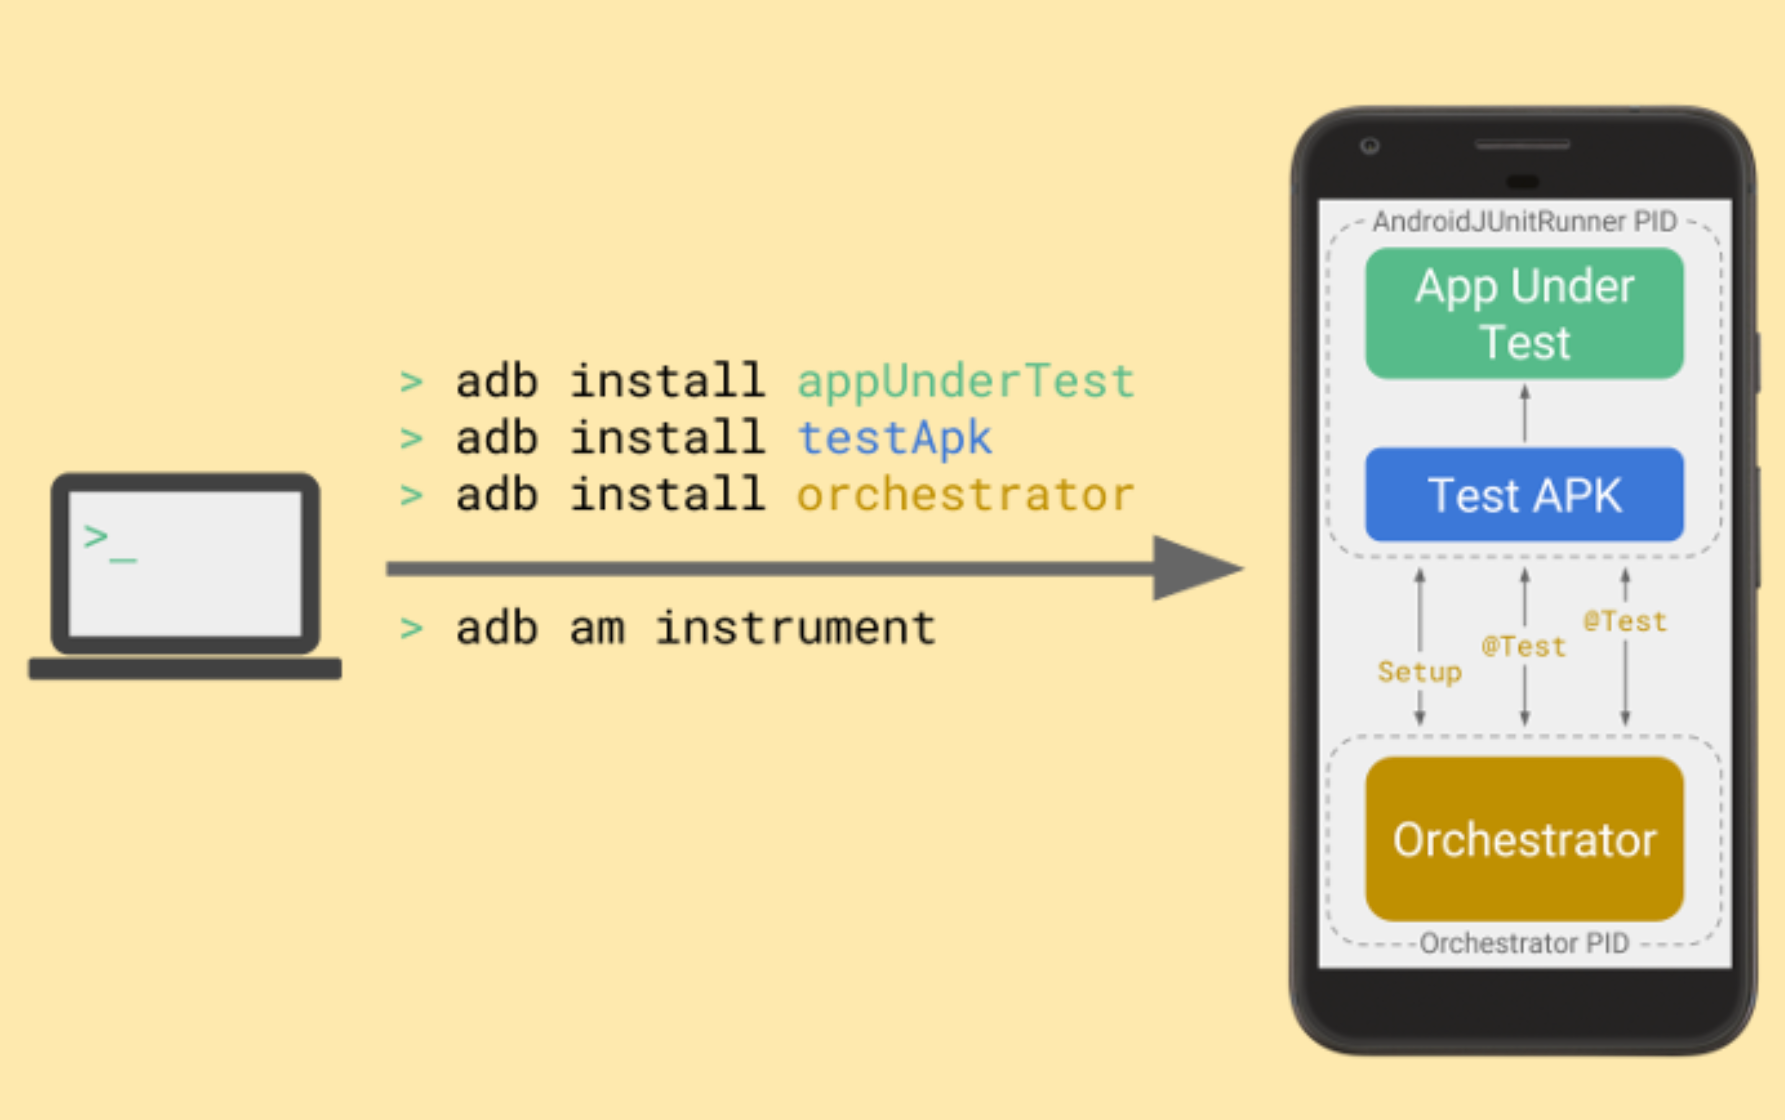 The orchestrator allows you to control JUnit tests